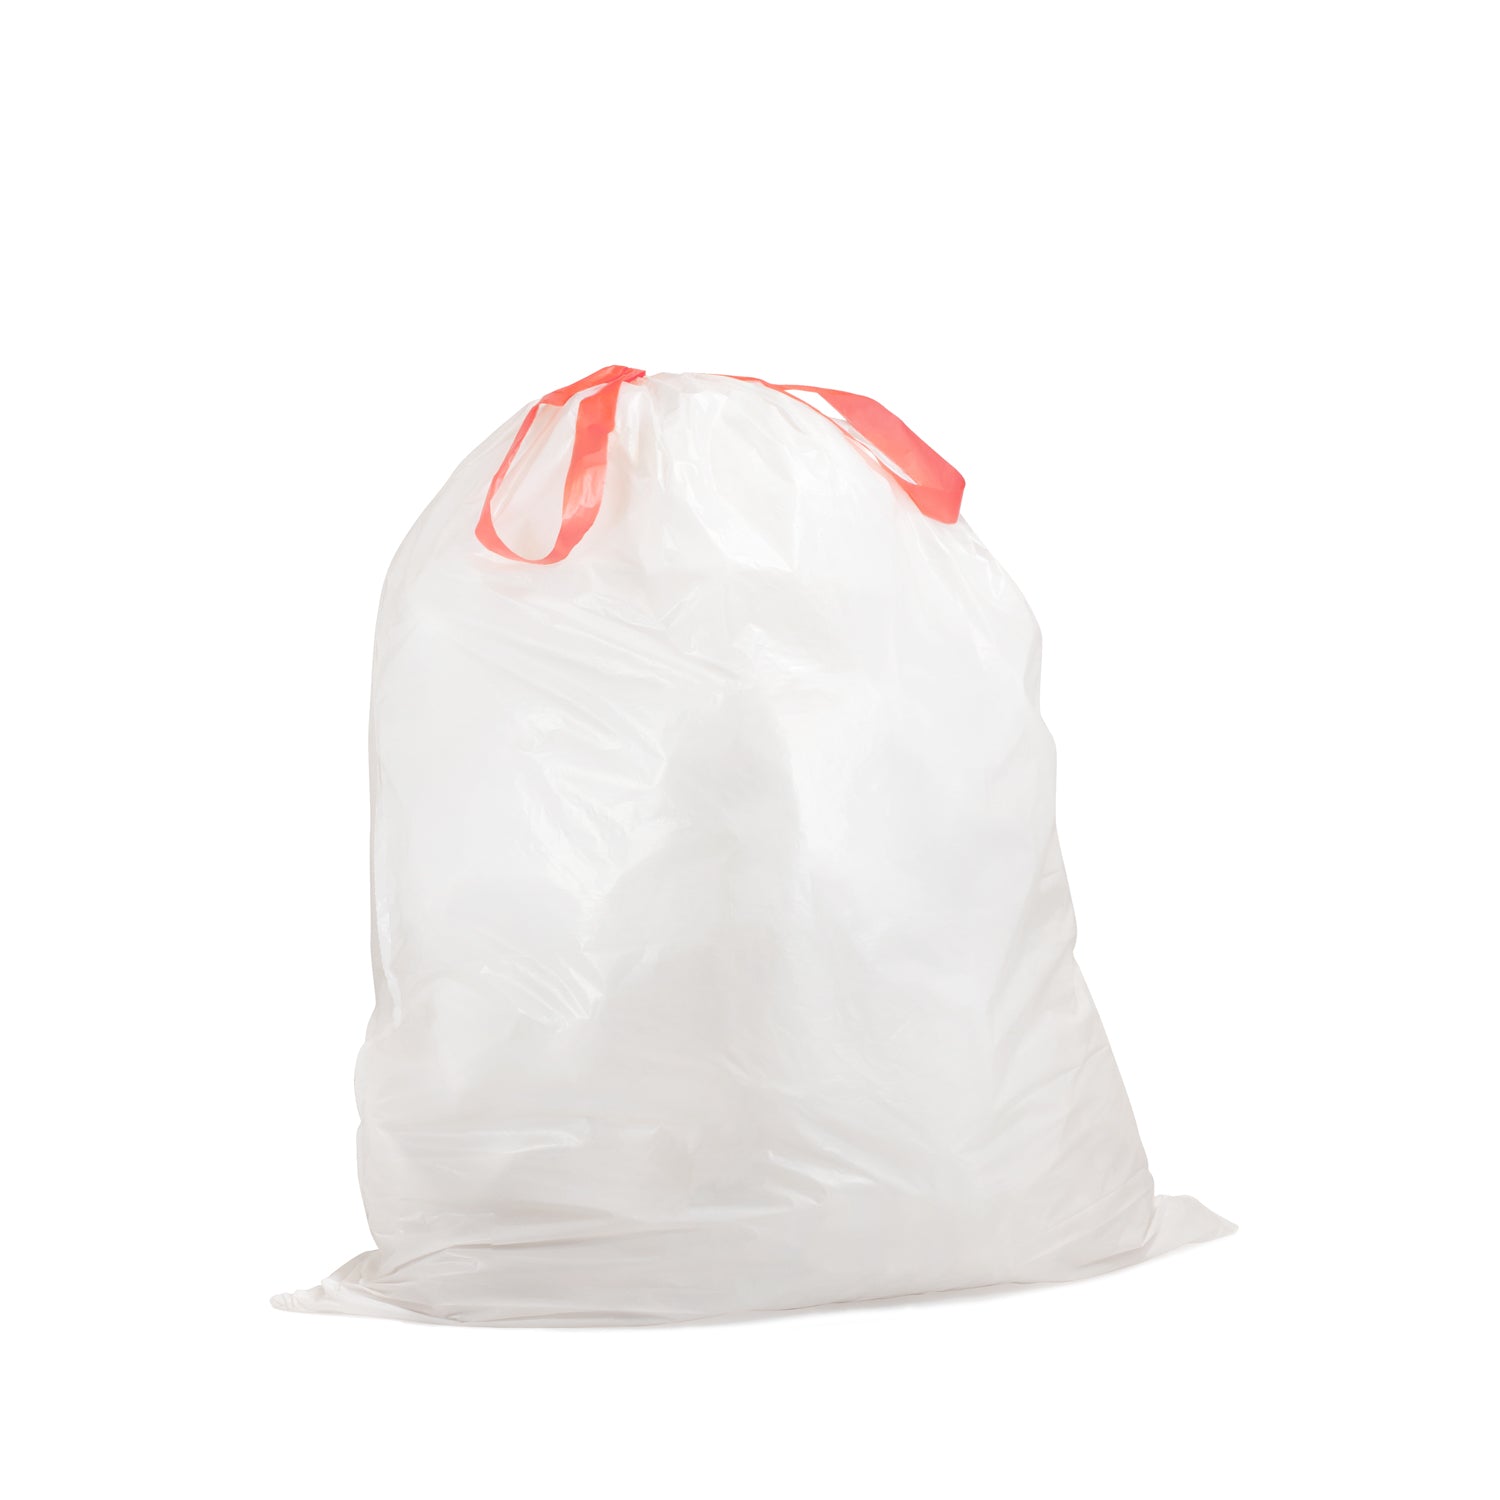 13 Gallons Plastic Trash Bags - 270 Count